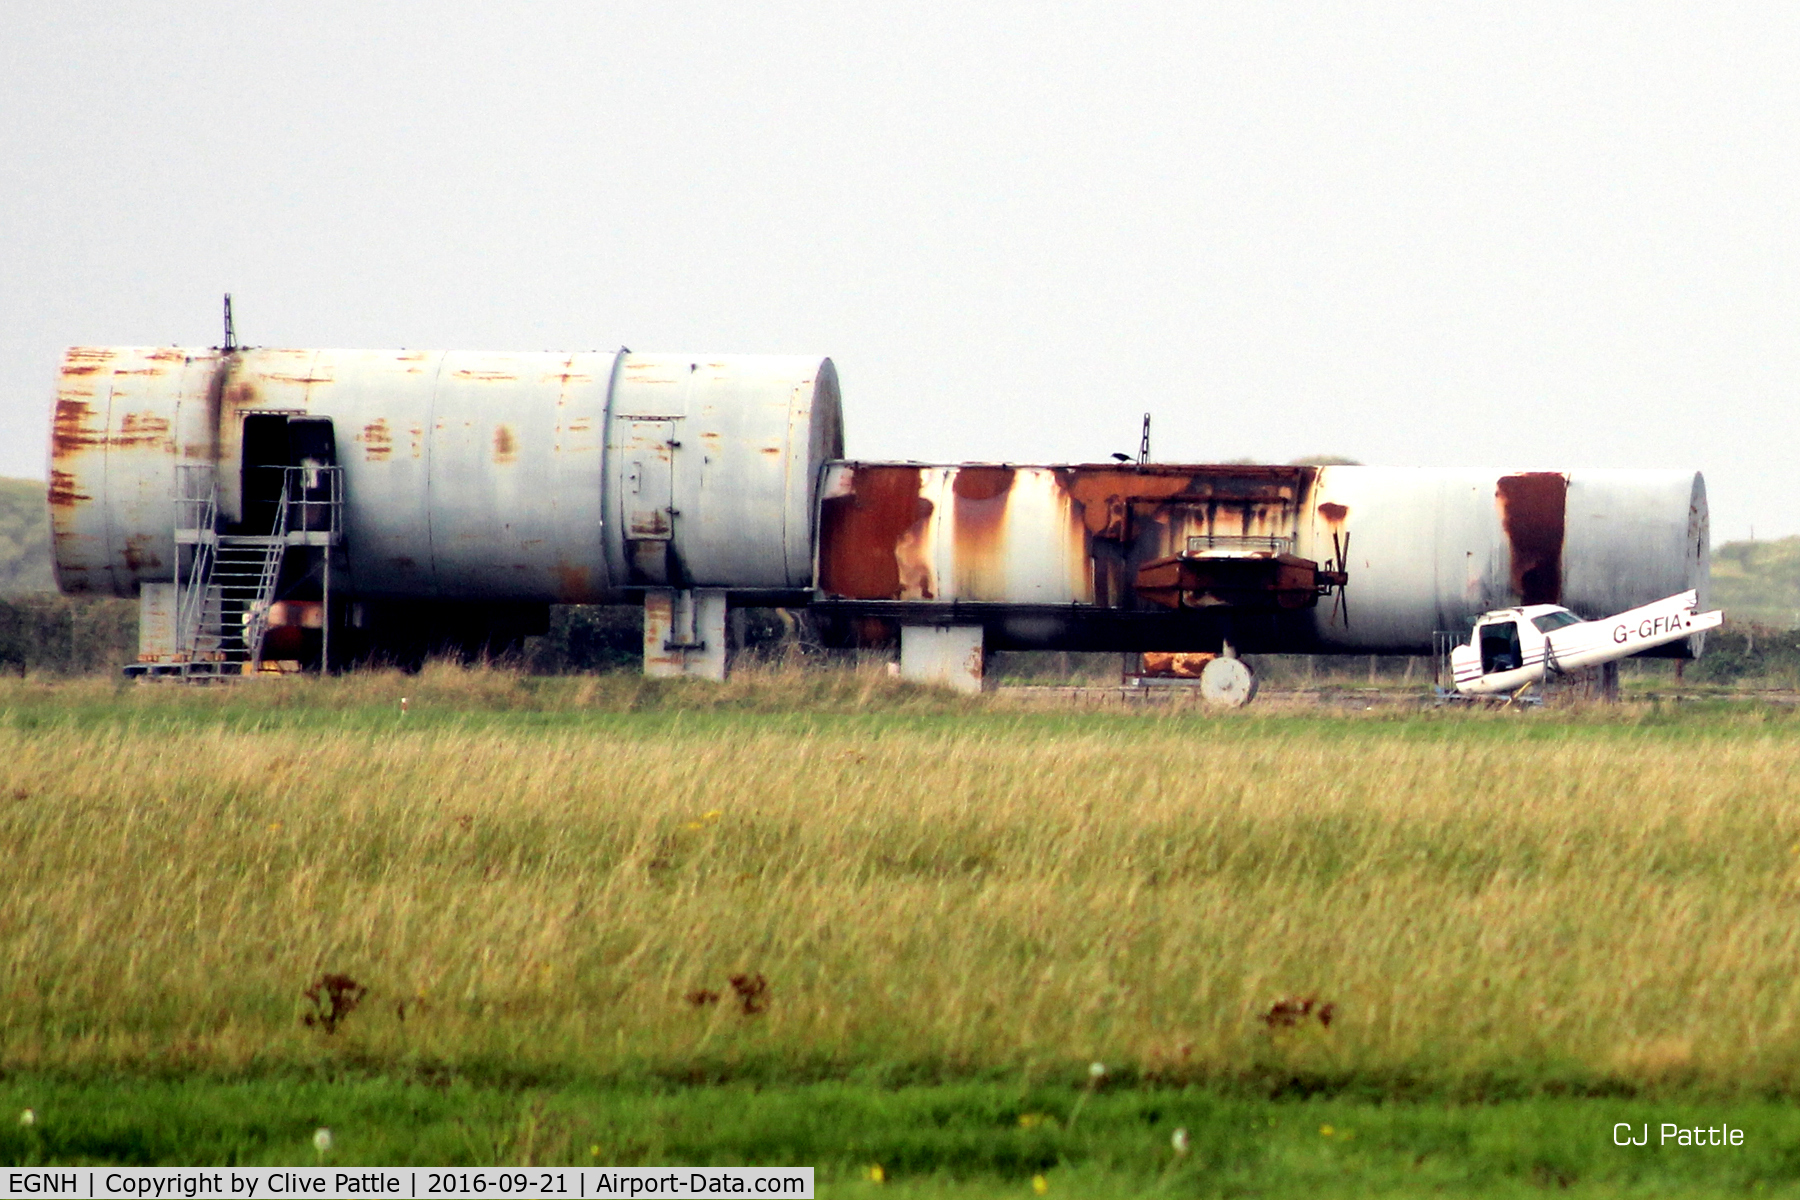 Blackpool International Airport, Blackpool, England United Kingdom (EGNH) - Blackpool EGNH - Fire training area on southside. Remains of C152 G-GFIA are visible. Dumped Cougar G-OOGS is nearby (not in shot)